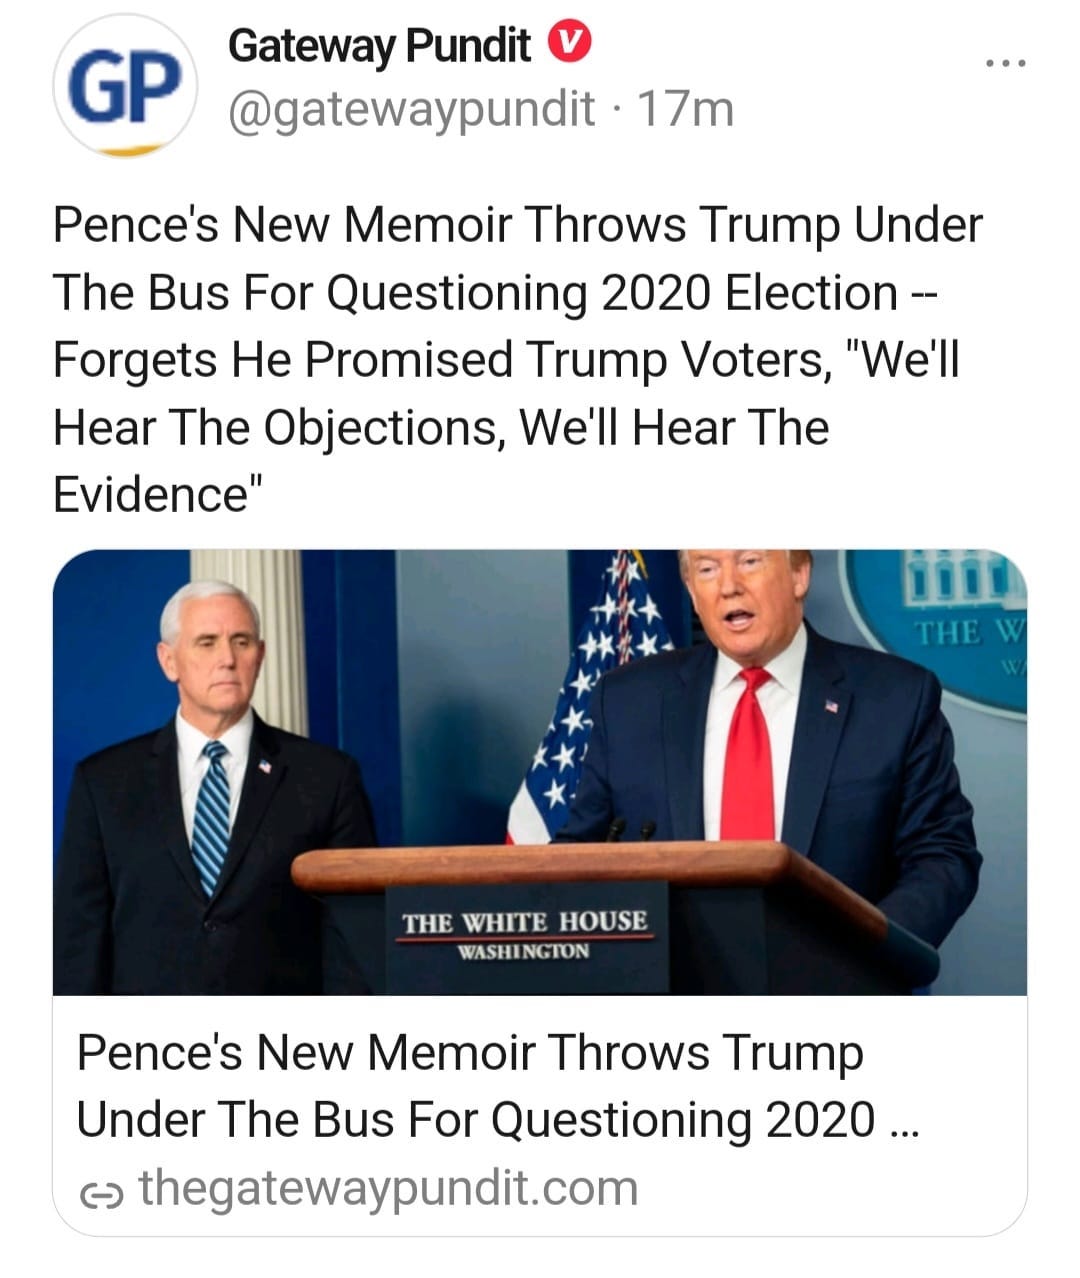 May be a Twitter screenshot of 2 people and text that says 'GP Gateway Pundit @gatewaypundit 17m Pence's New Memoir Throws Trump Under The Bus For Questioning 2020 Election- Forgets He Promised Trump Voters, "We'll Hear The Objections, We'll Hear The Evidence" 110 THEW THE WHITE HOUSE WASHINGTON Pence's New Memoir Throws Trump Under The Bus For Questioning 2020... … ૯ thegatewaypundit.com'